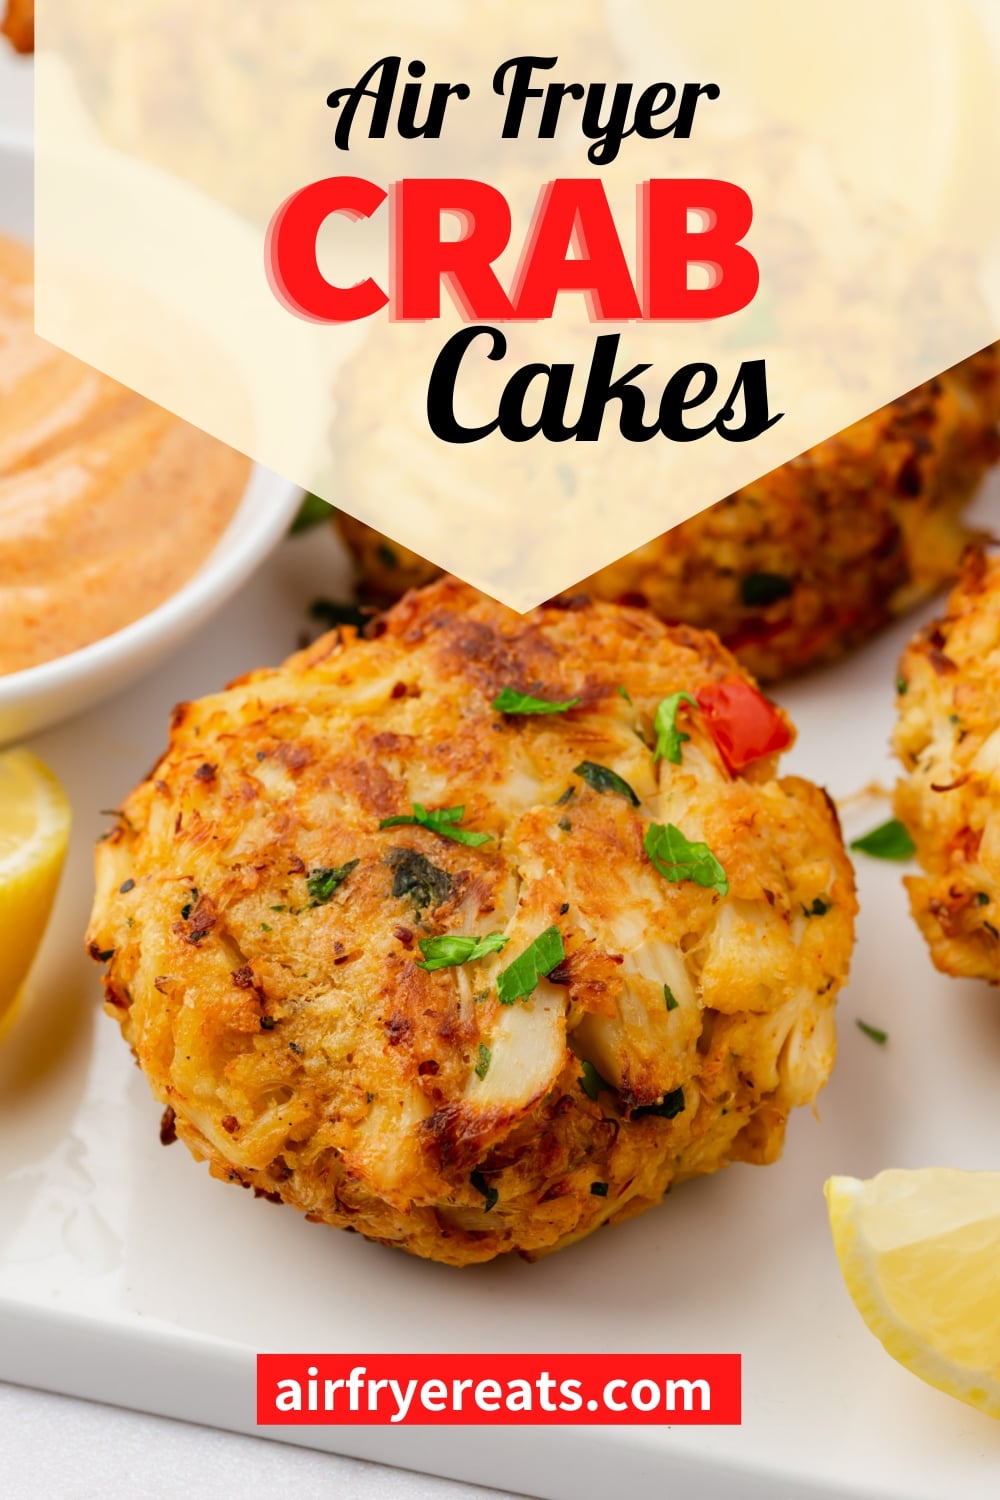 Turn fresh crab meat into the most juicy, delicious, golden brown crab cakes using the air fryer! Air Fryer Crab Cakes are easy to make, packed with flavor, and make the perfect appetizer or seafood lover's dinner. via @vegetarianmamma